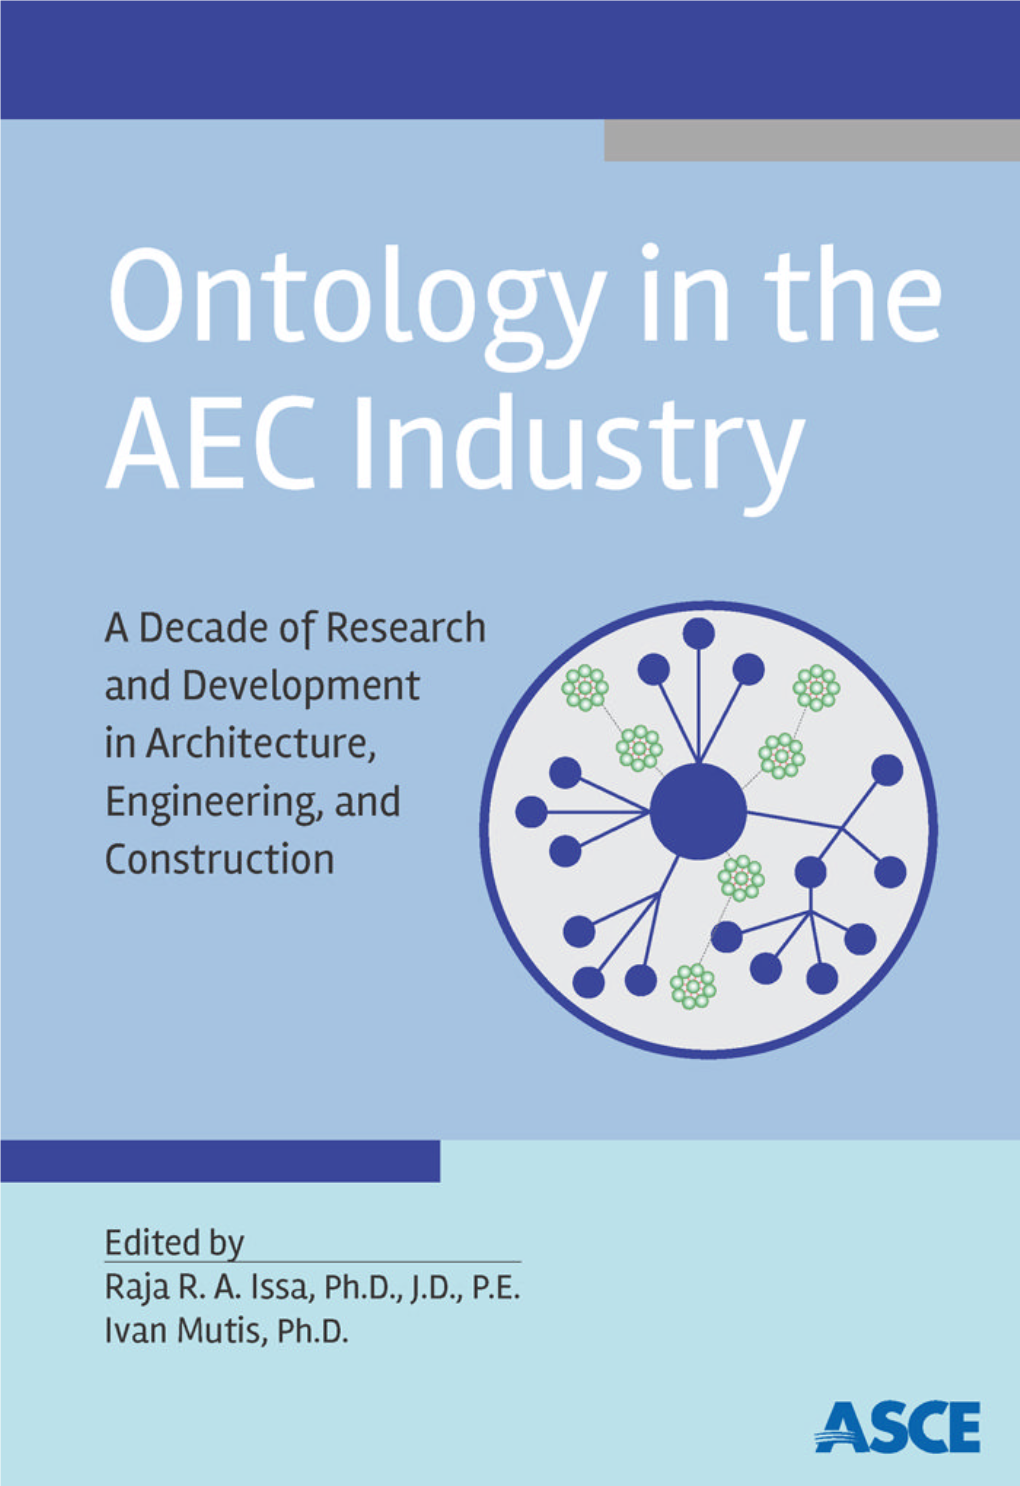 Ontology in the AEC Industry a Decade of Research and Development in Architecture, Engineering, and Construction